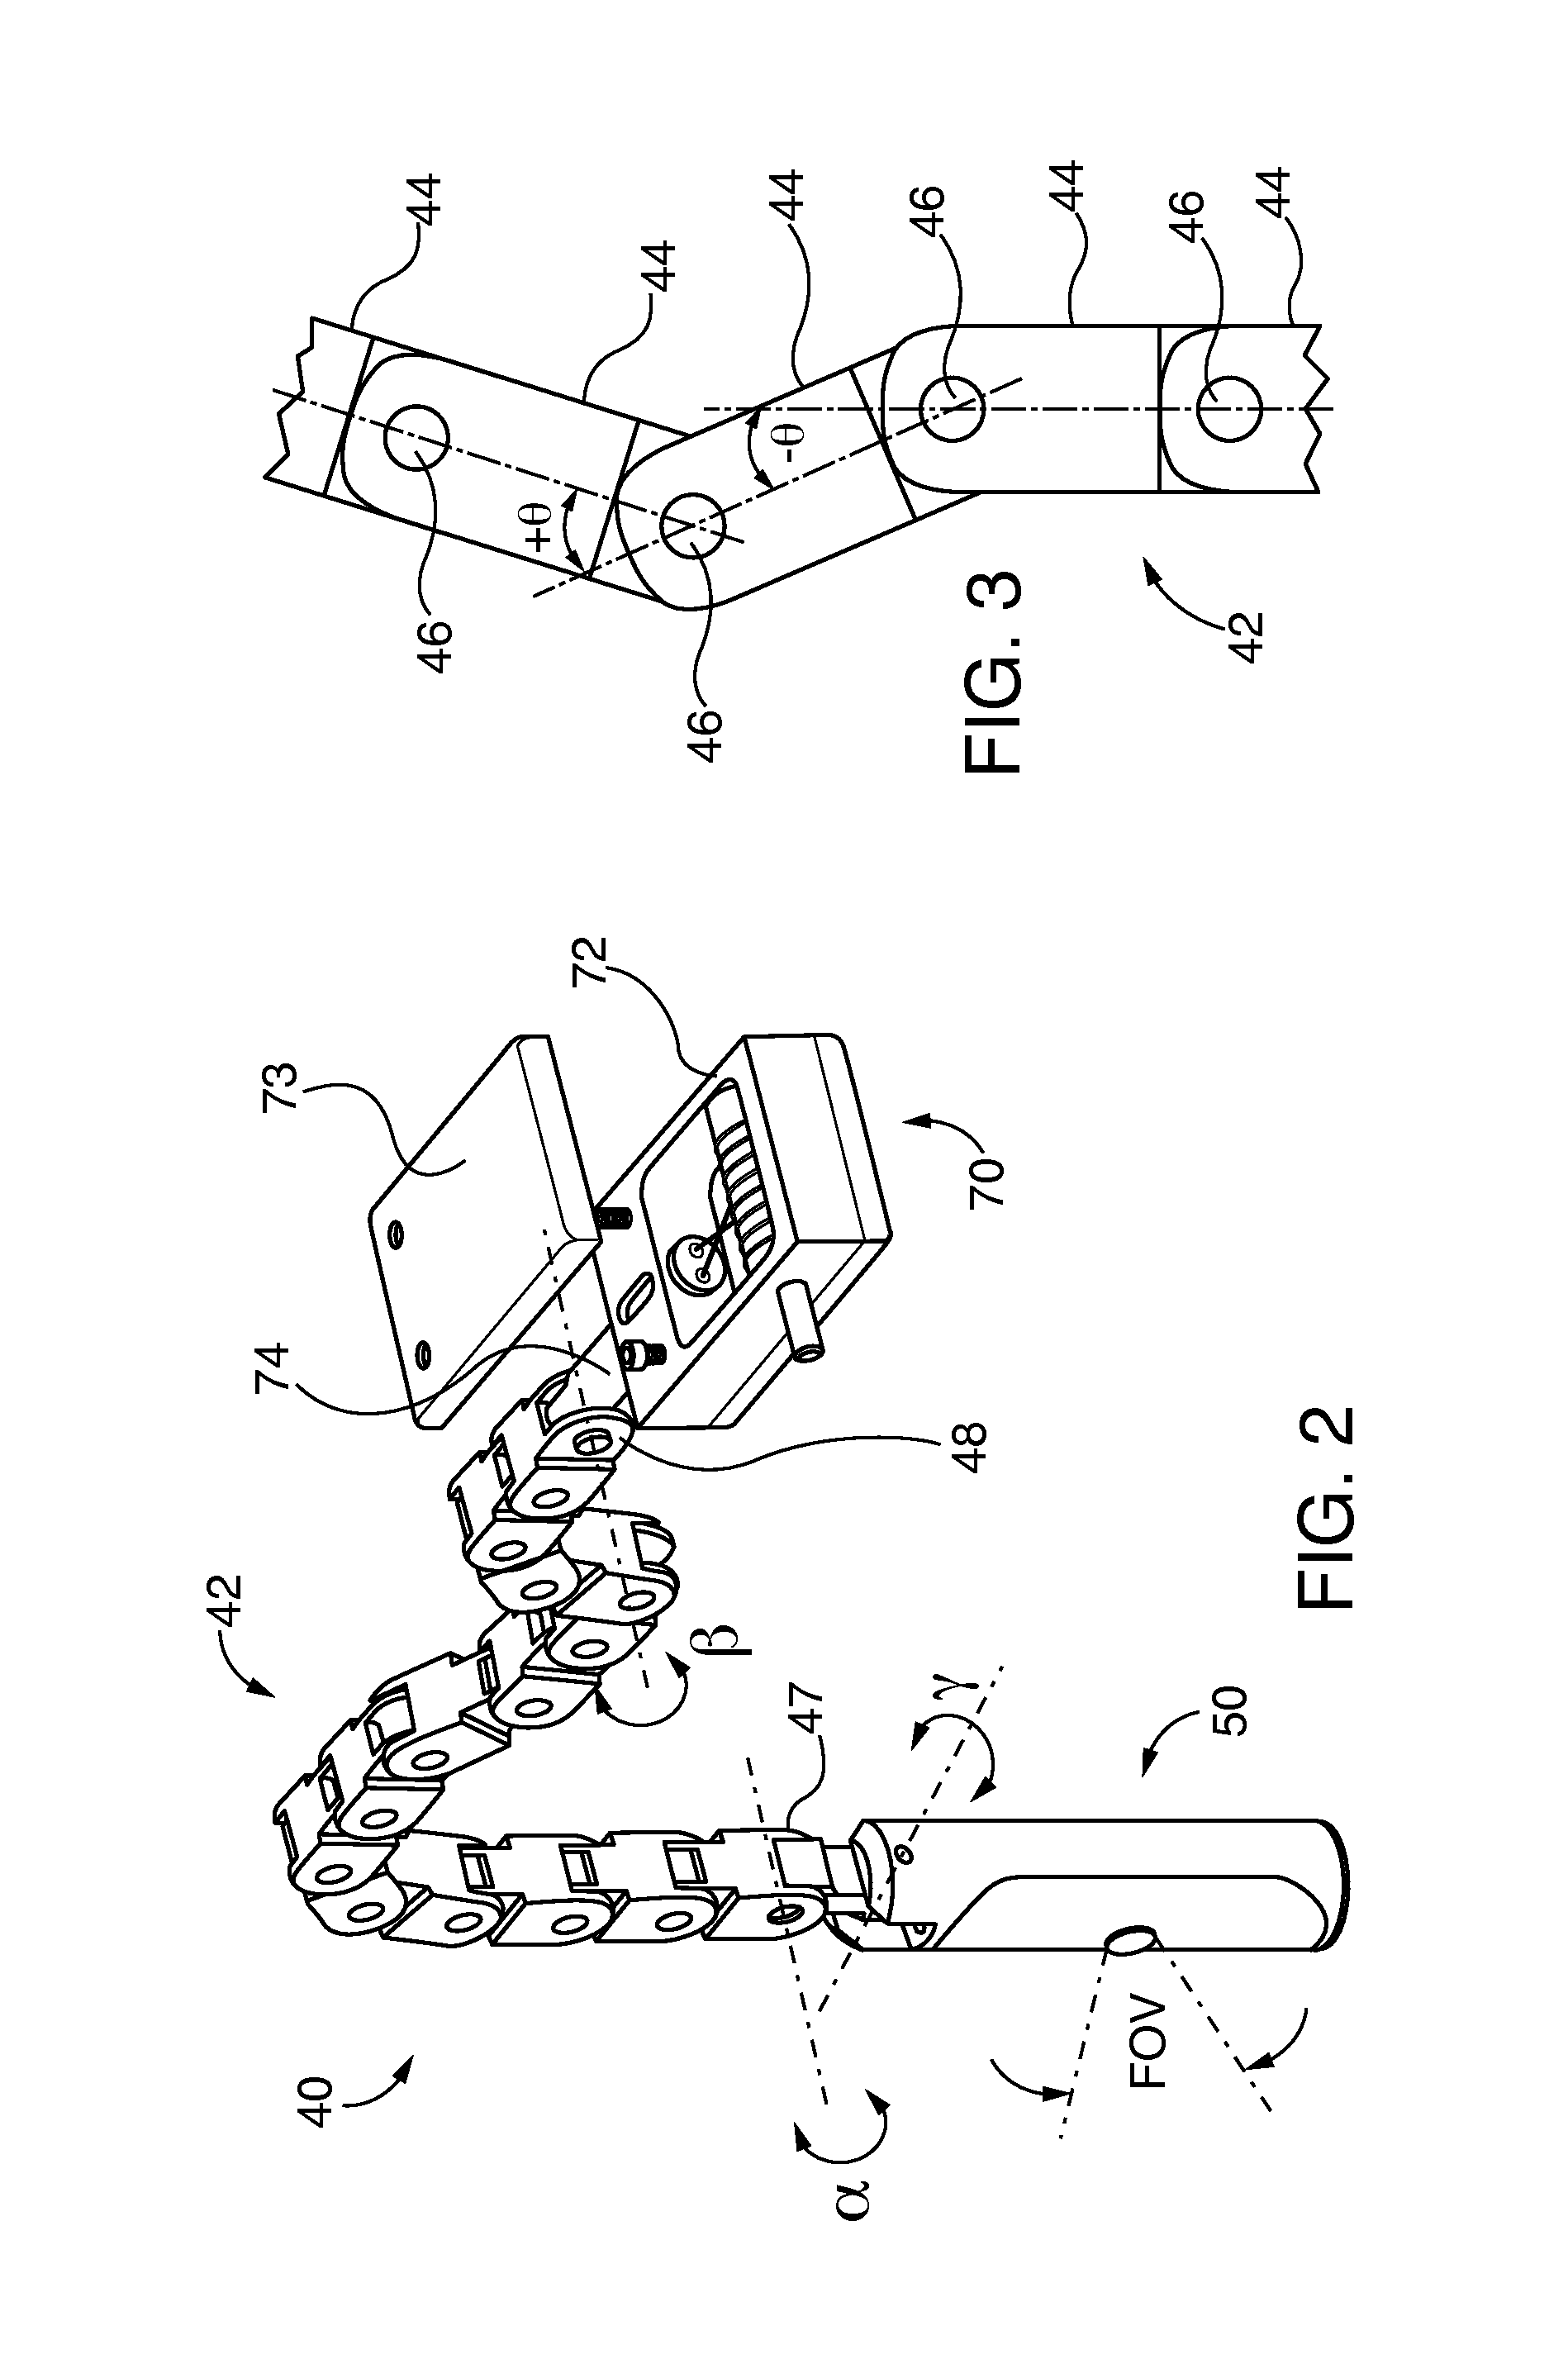 Flexible linkage camera system and method for visual inspection of off line industrial gas turbines and other power generation machinery